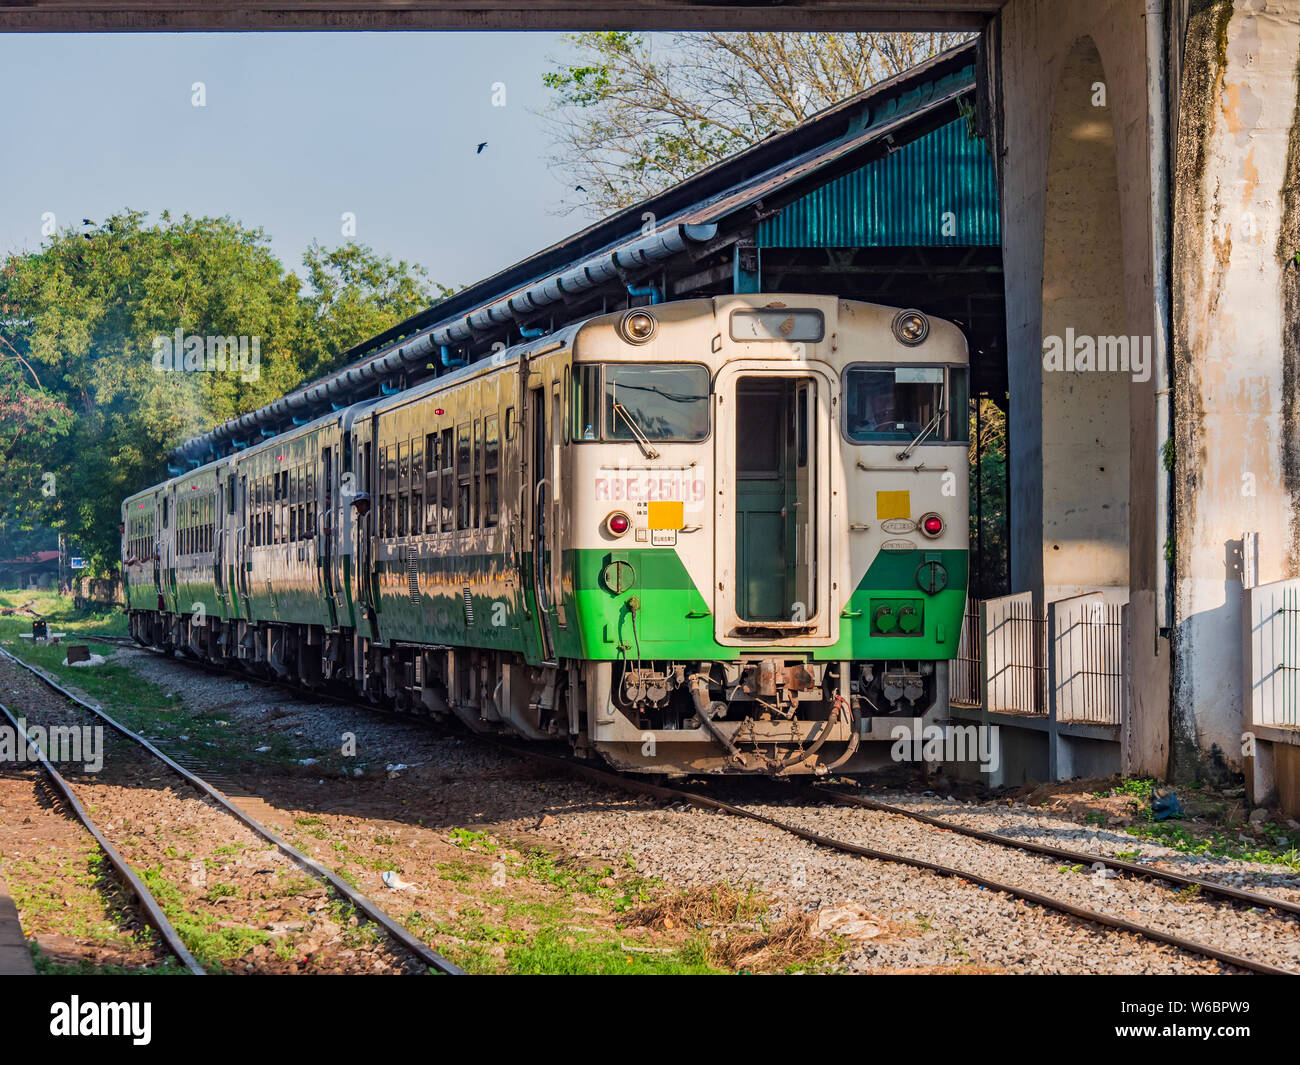 Yangon, Myanmar - November 5, 2017: Myanmar’s extensive railway network is slowly being modernised, mainly with used trains from other Asian countries Stock Photo